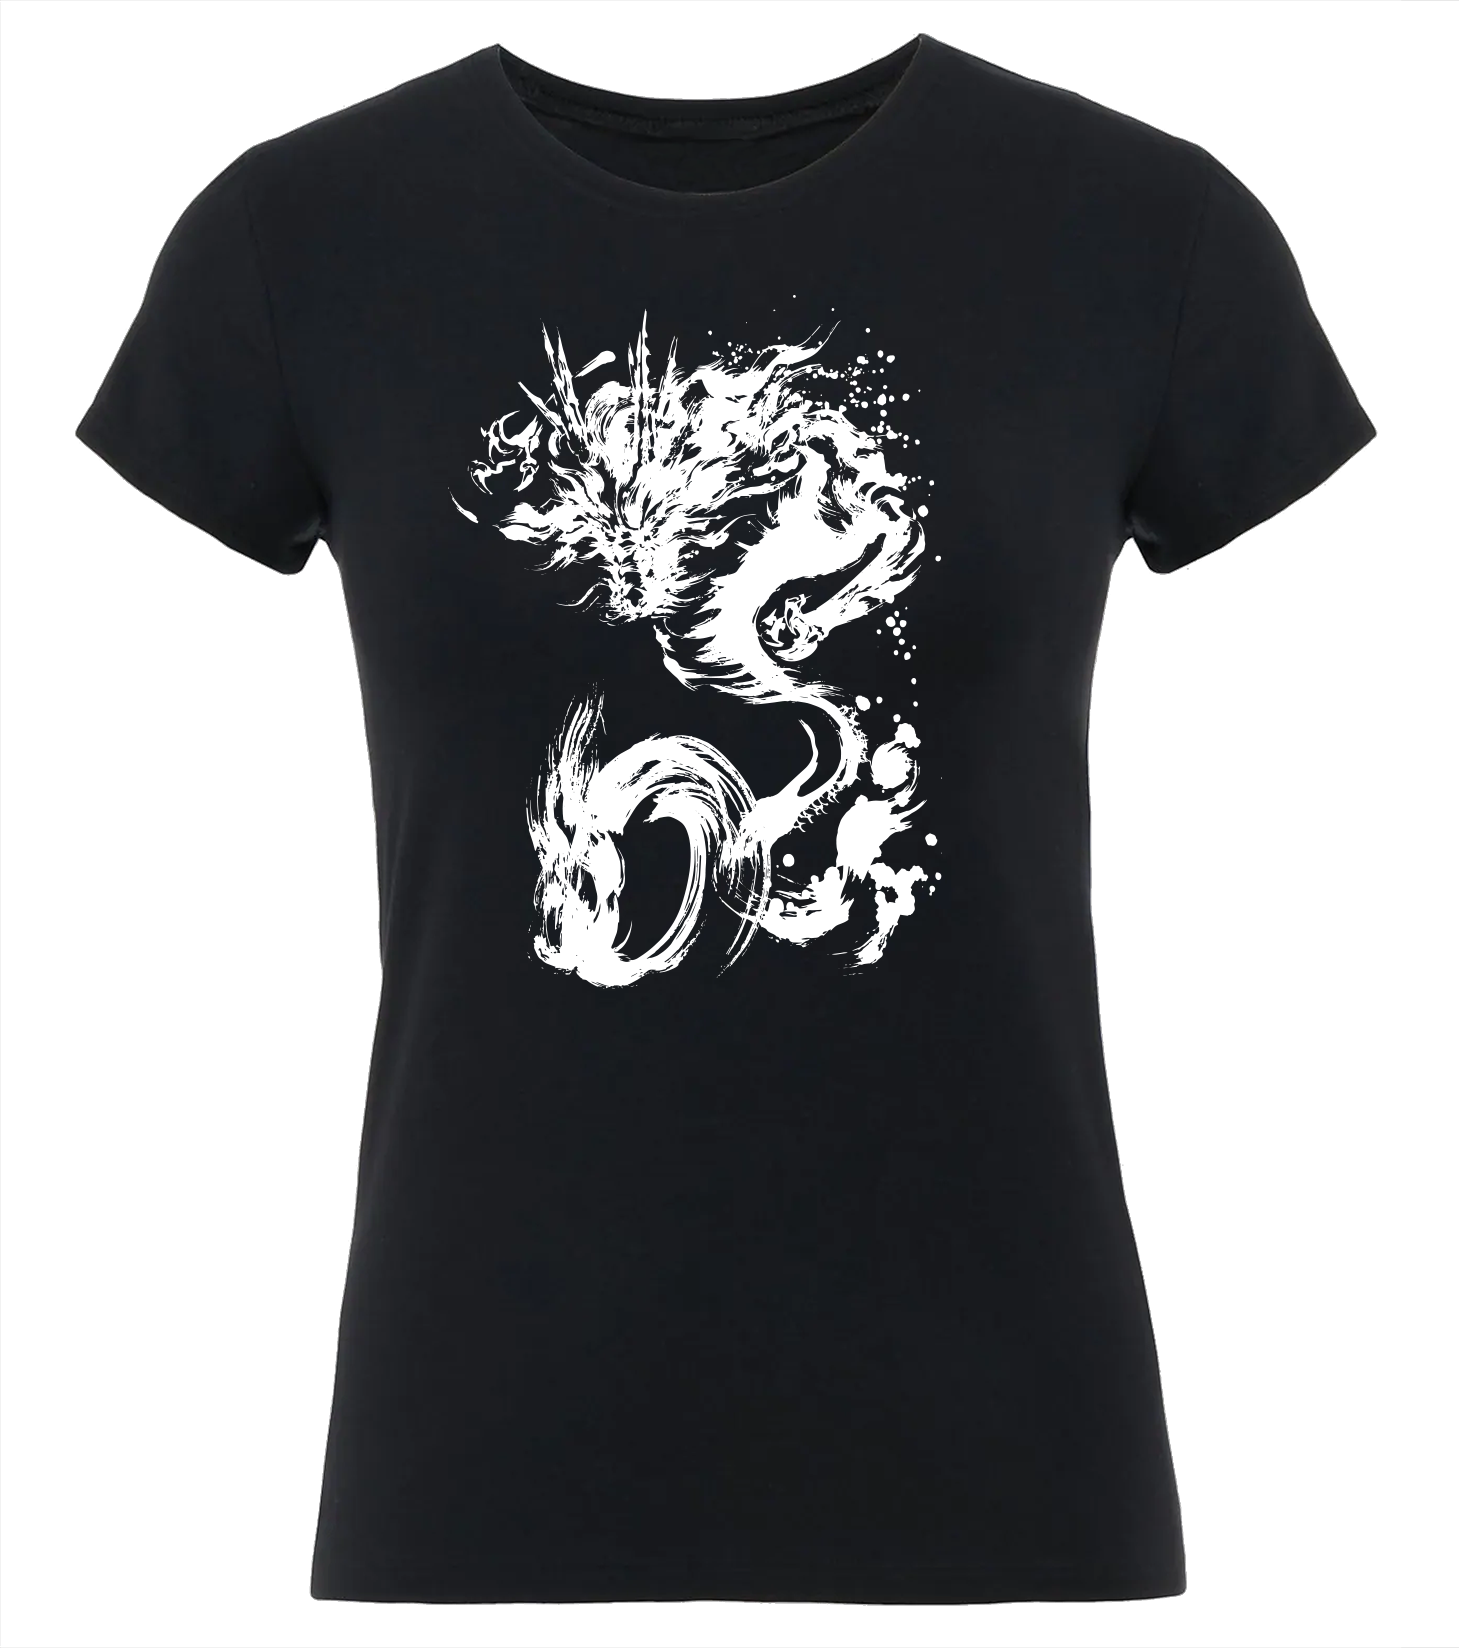 Dragon T-Shirt by Usui 2022 (Unisex/Girlie)